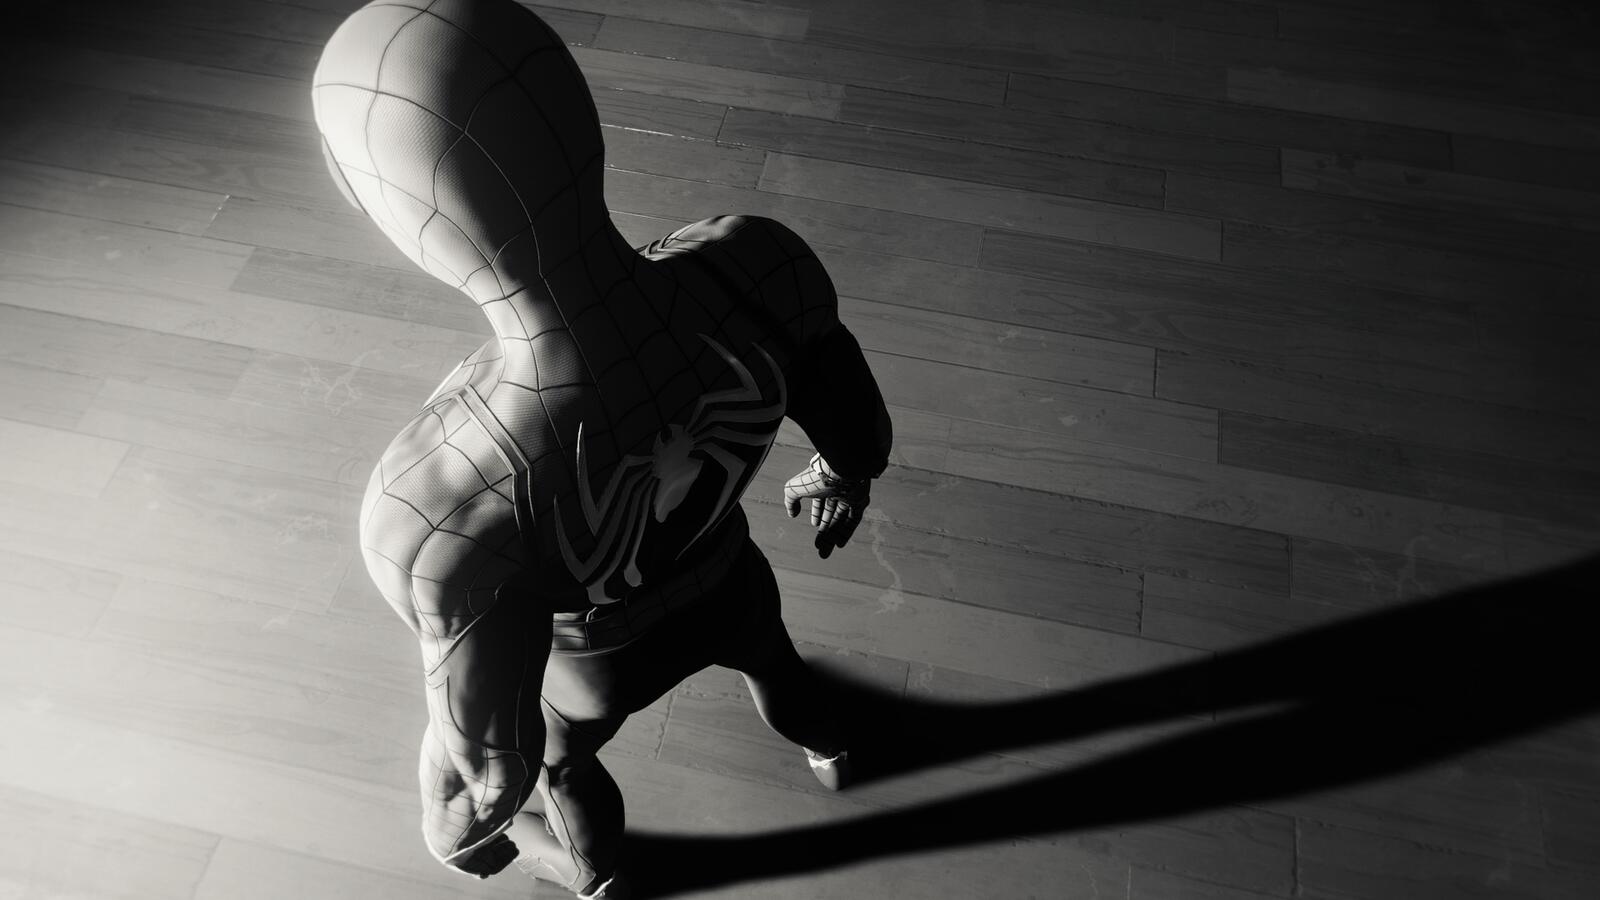 Wallpapers Spiderman PS4 spider man monochrome on the desktop